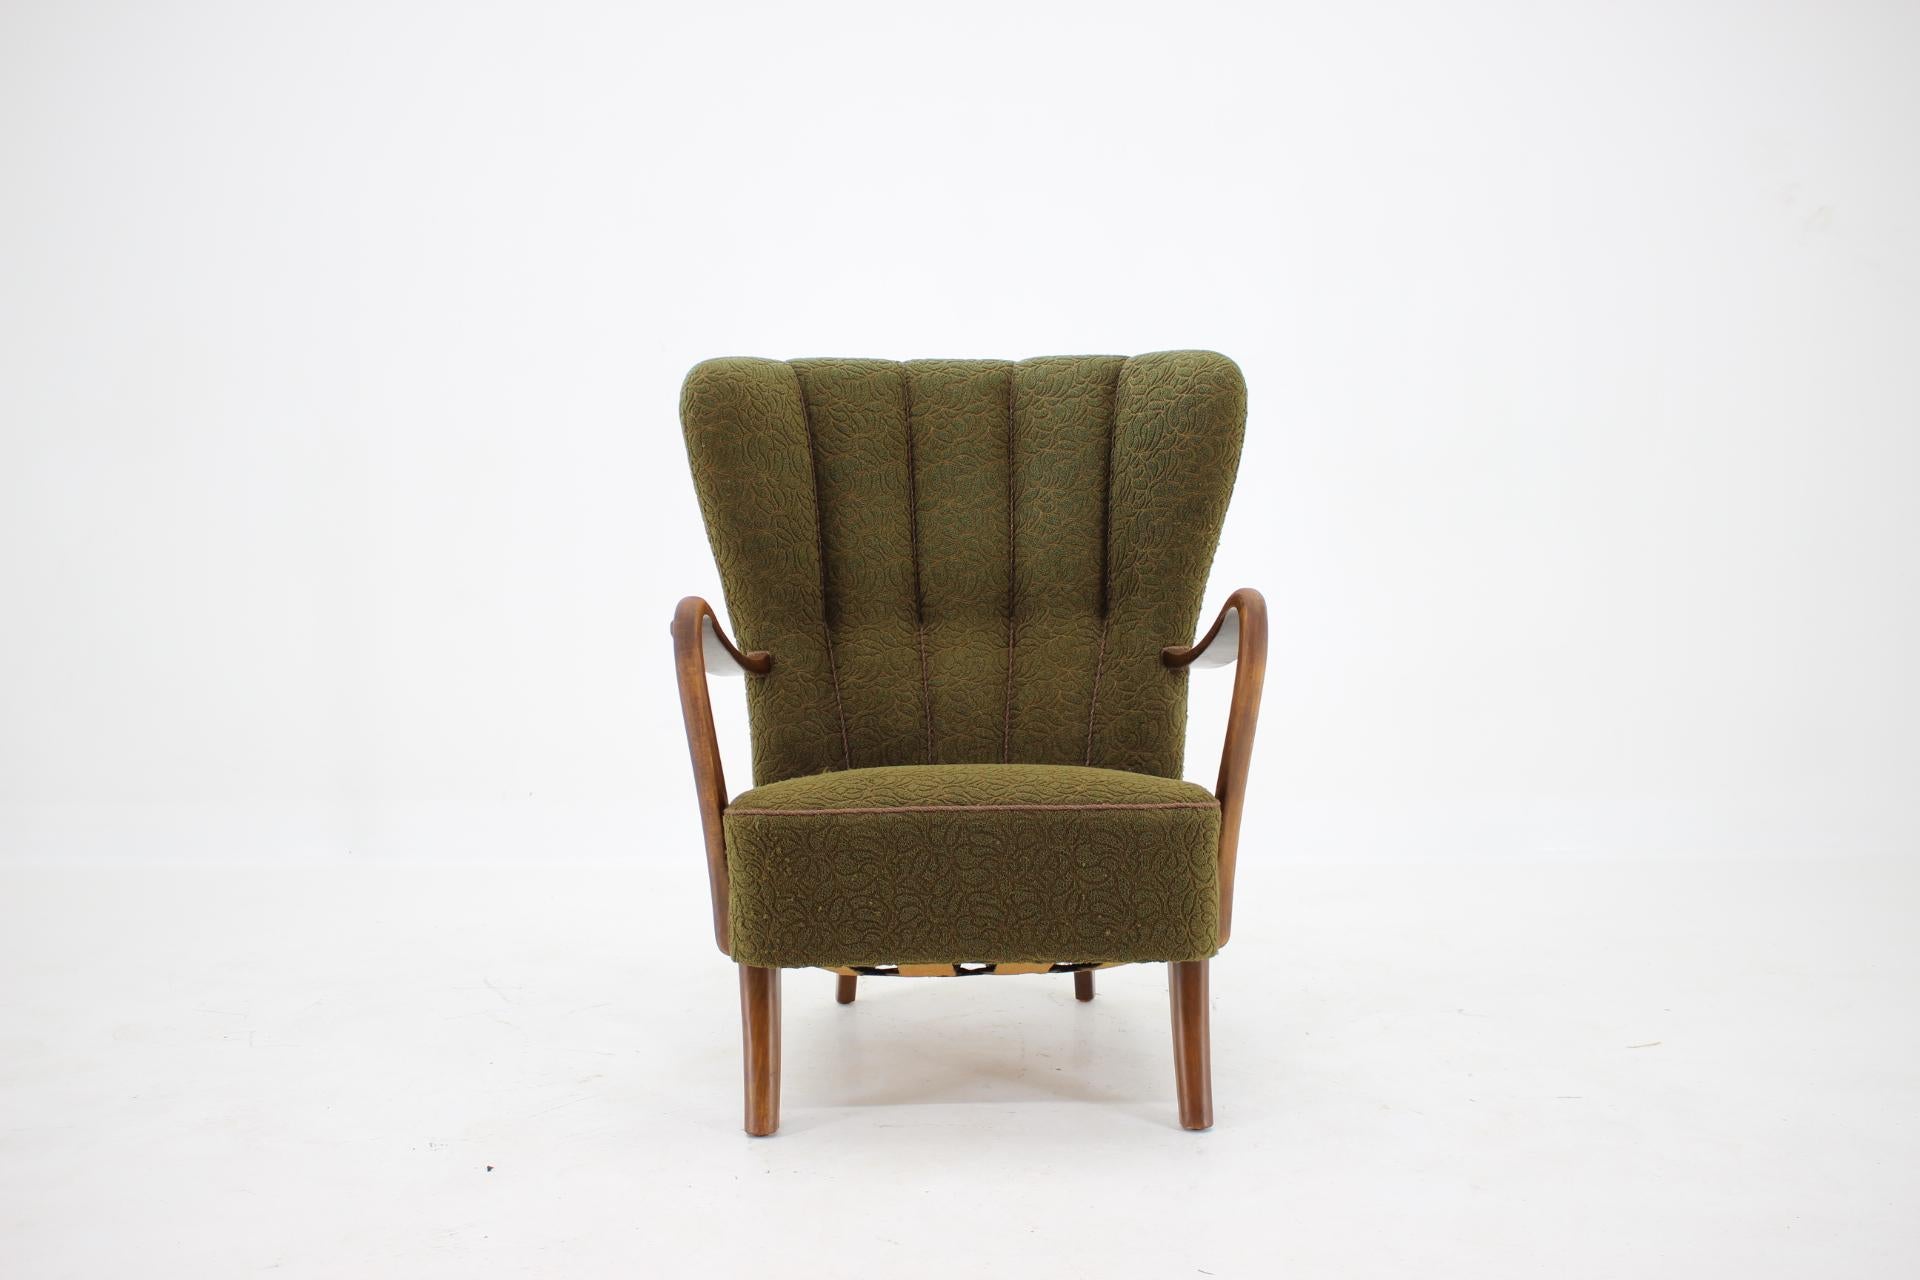 - Good original upholstery with minor signs of use
- The wooden parts have been refurbished.